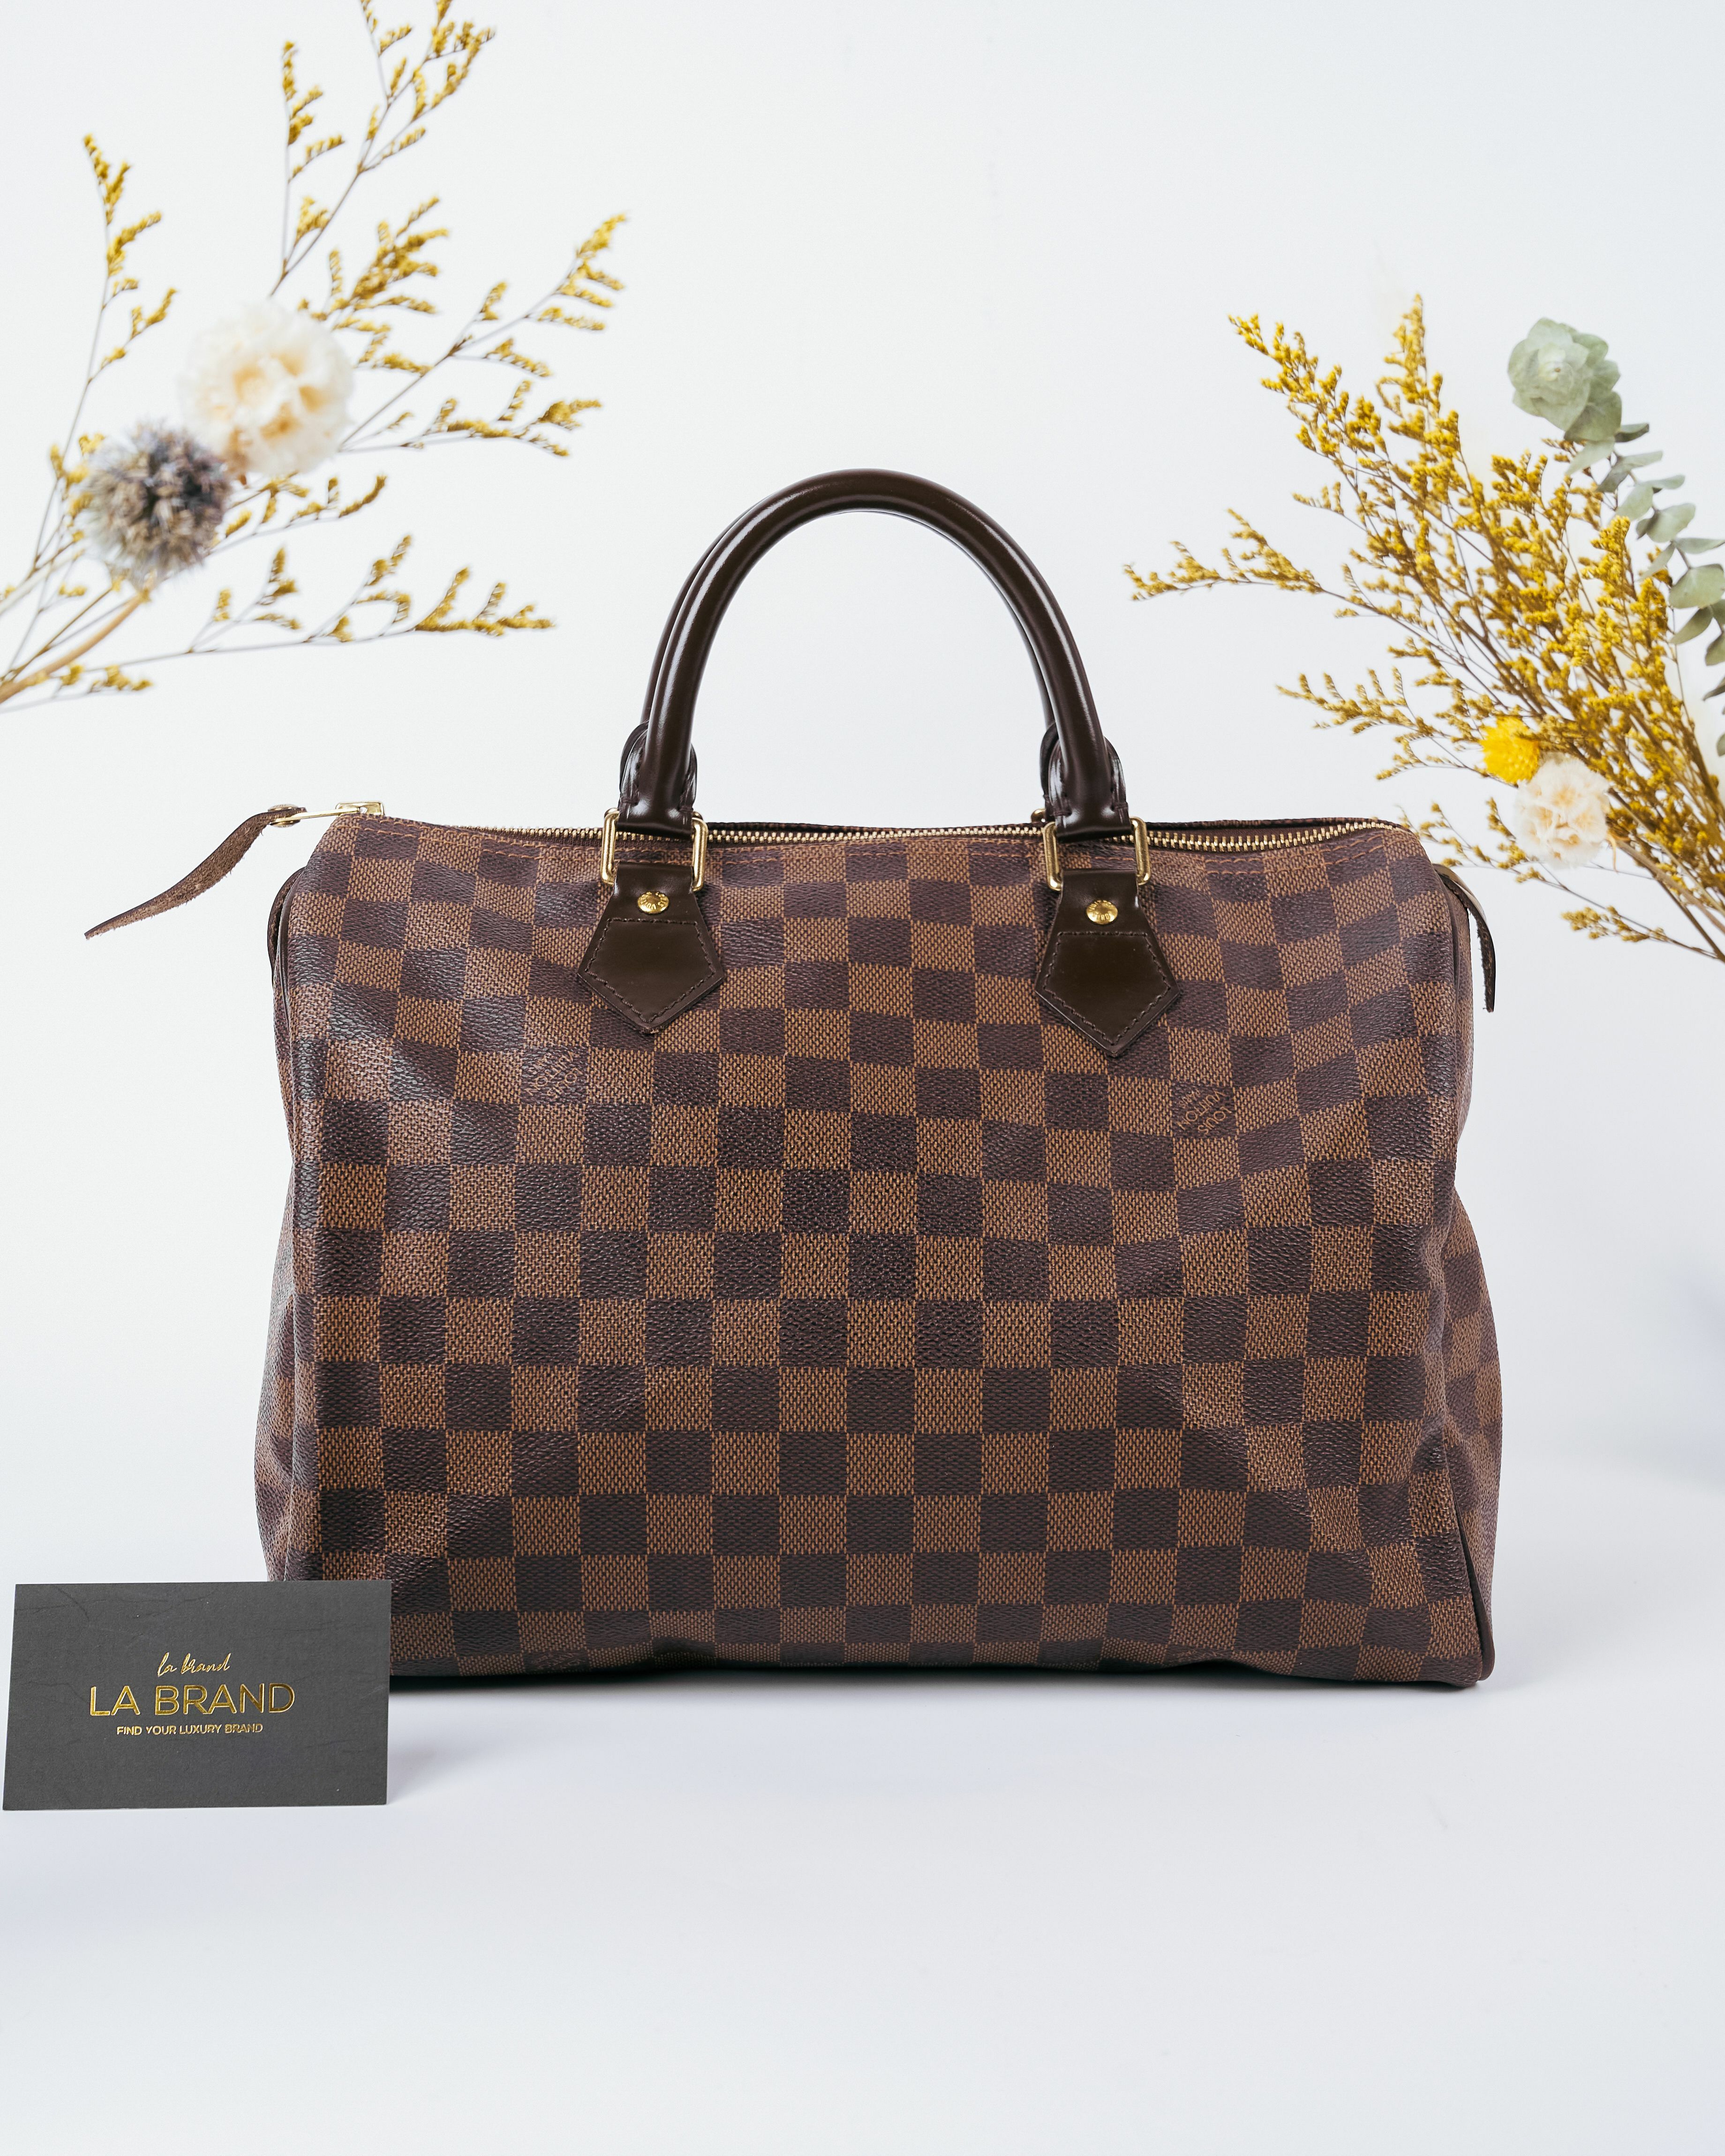 What's in my bag, Louis Vuitton Speedy 30 Damier Ebene & Review